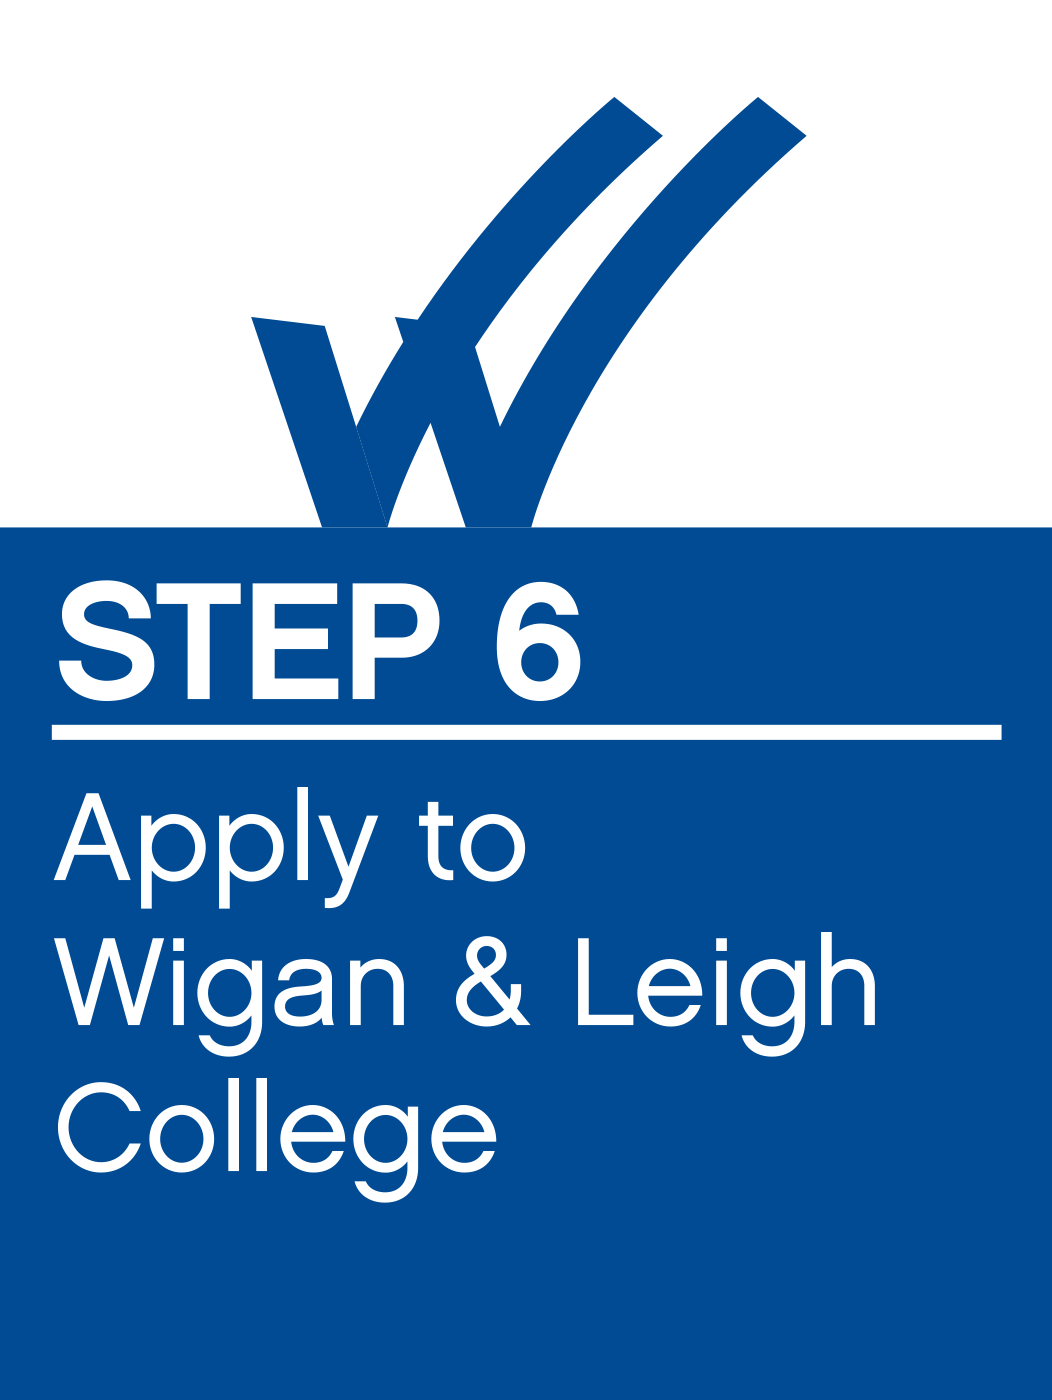 Step 6: Apply to Wigan & Leigh College